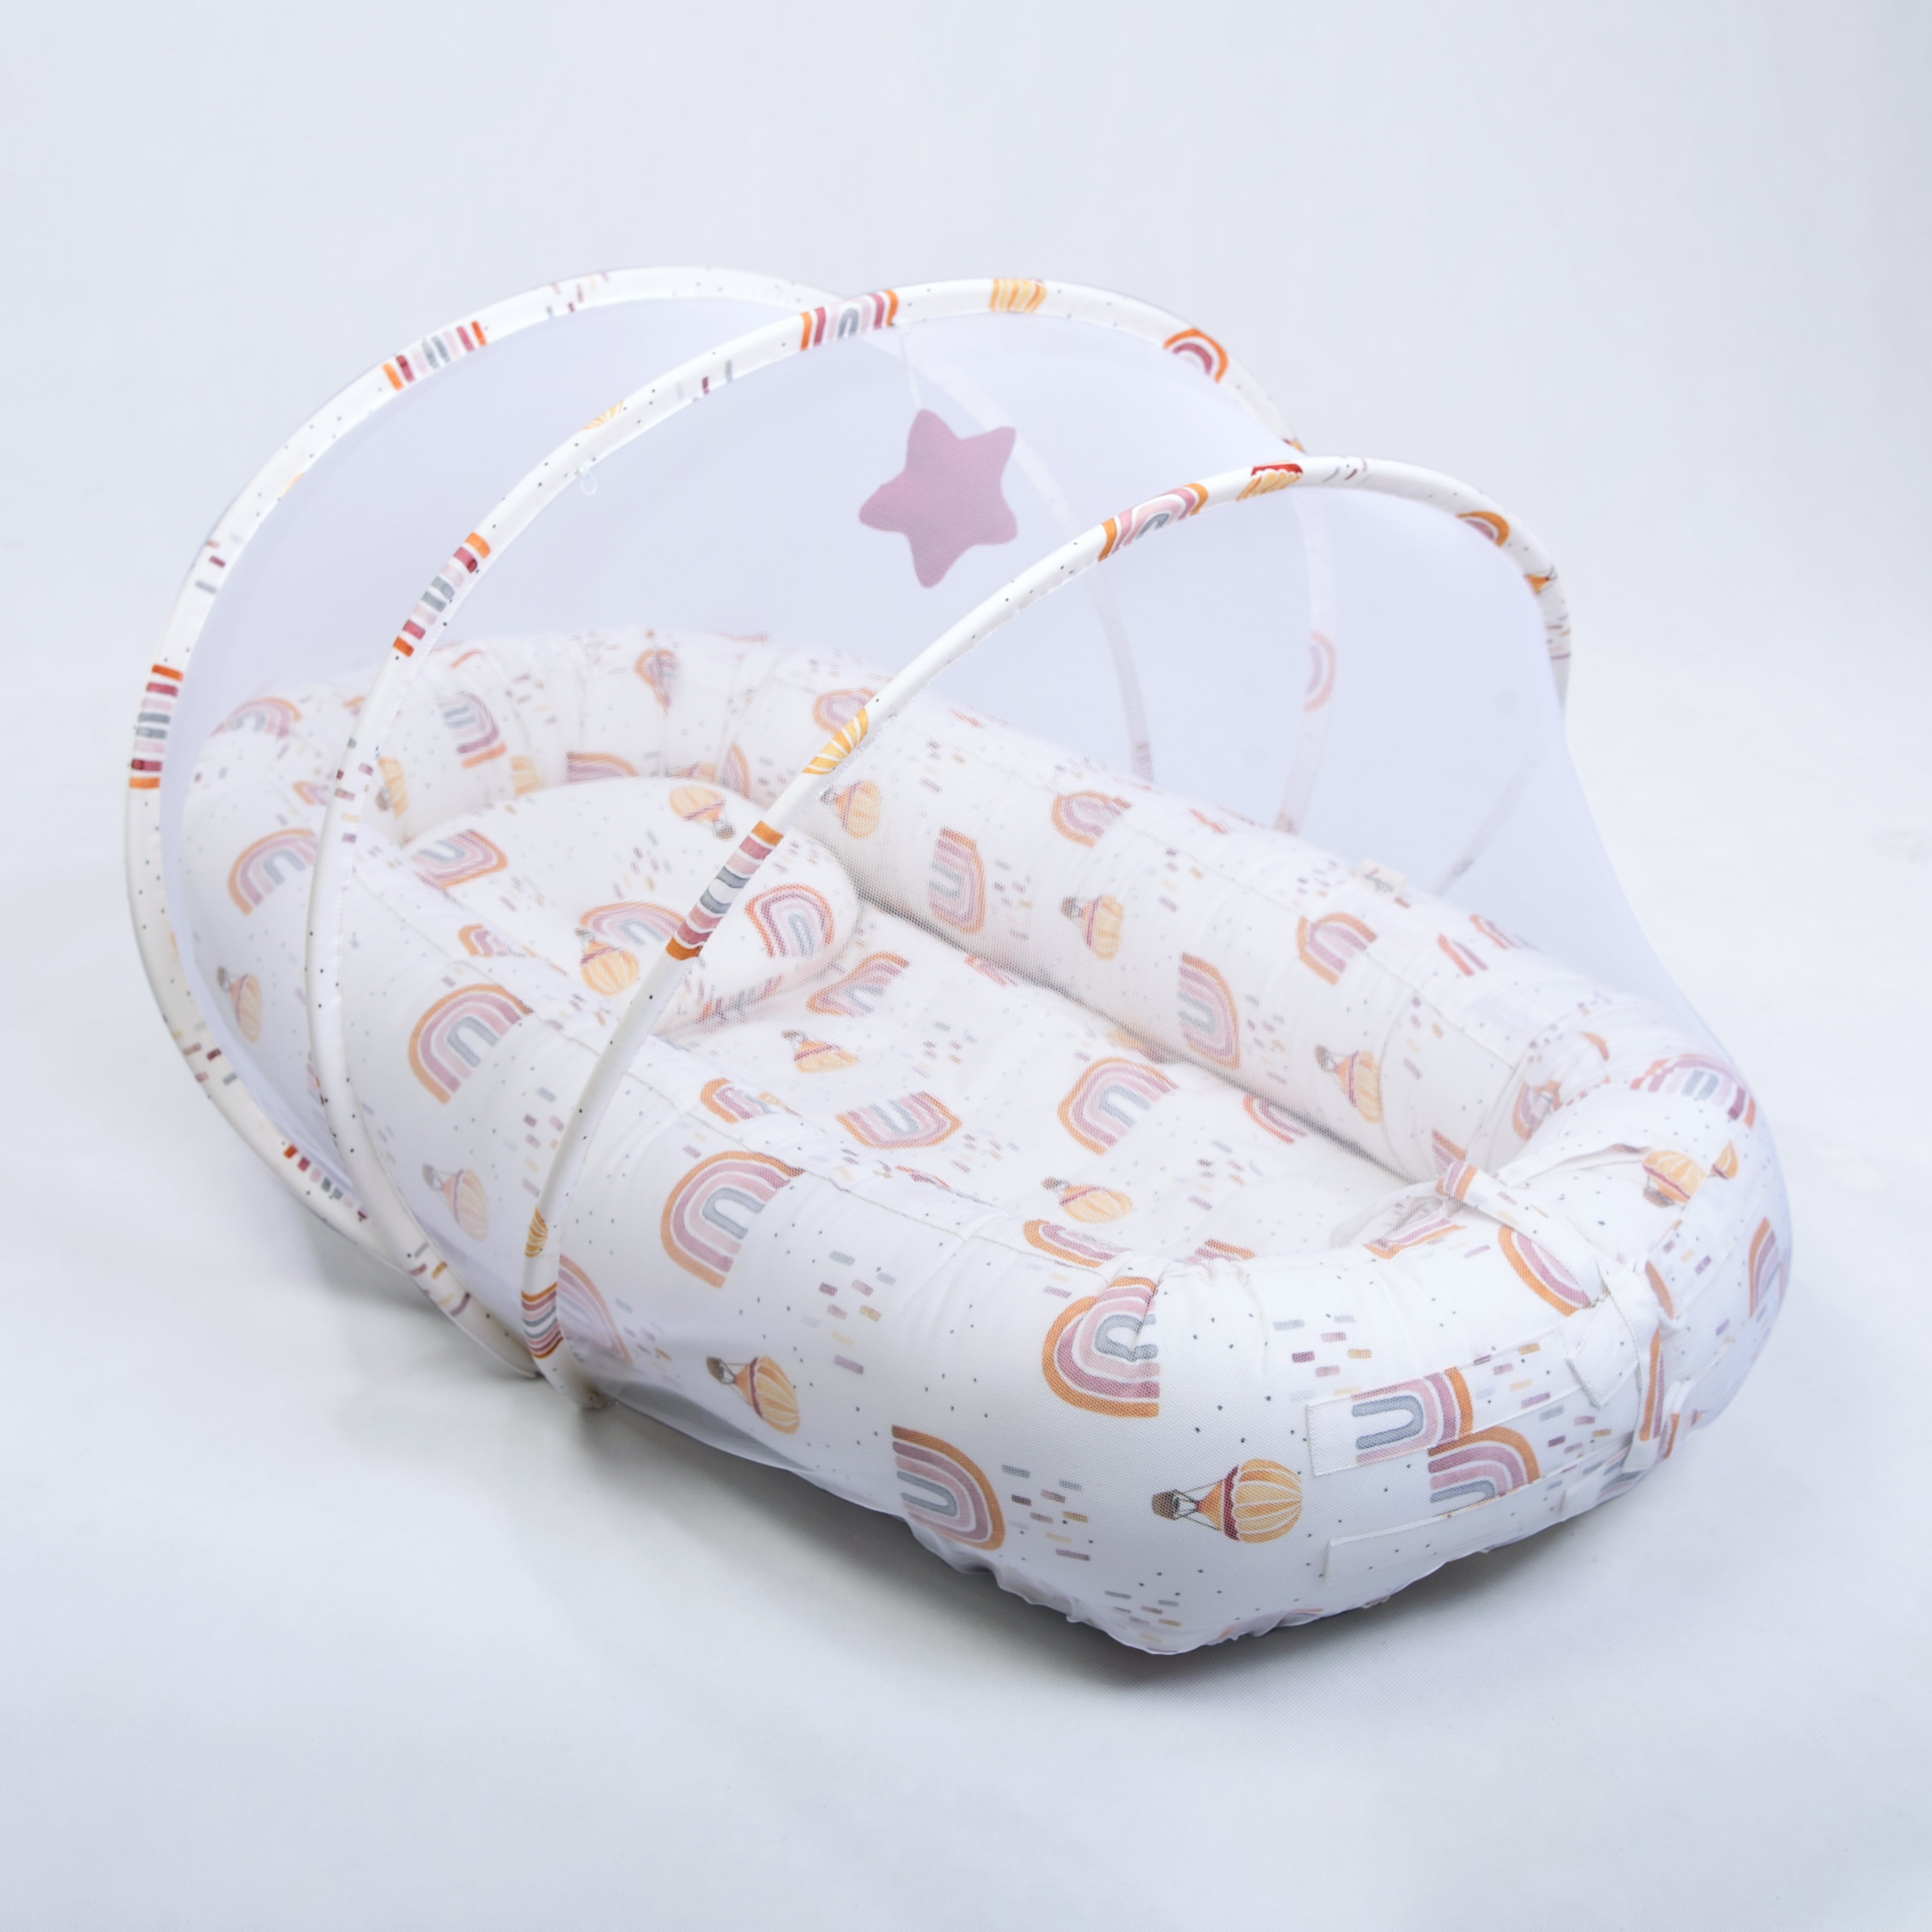 Whimsical Rainbow Baby Nest Set - Lil Mulberry